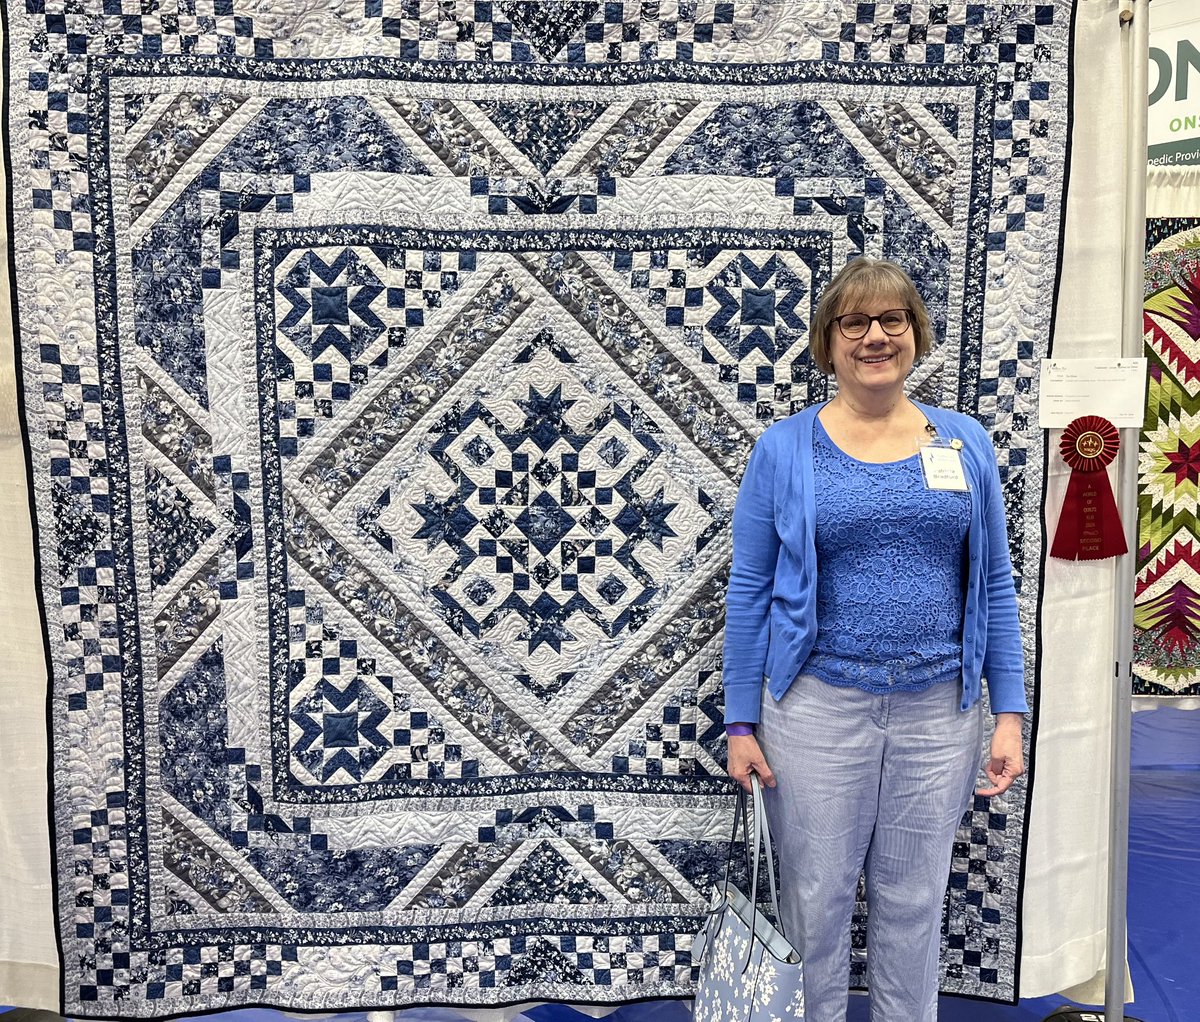 First quilt show. Second place ribbon